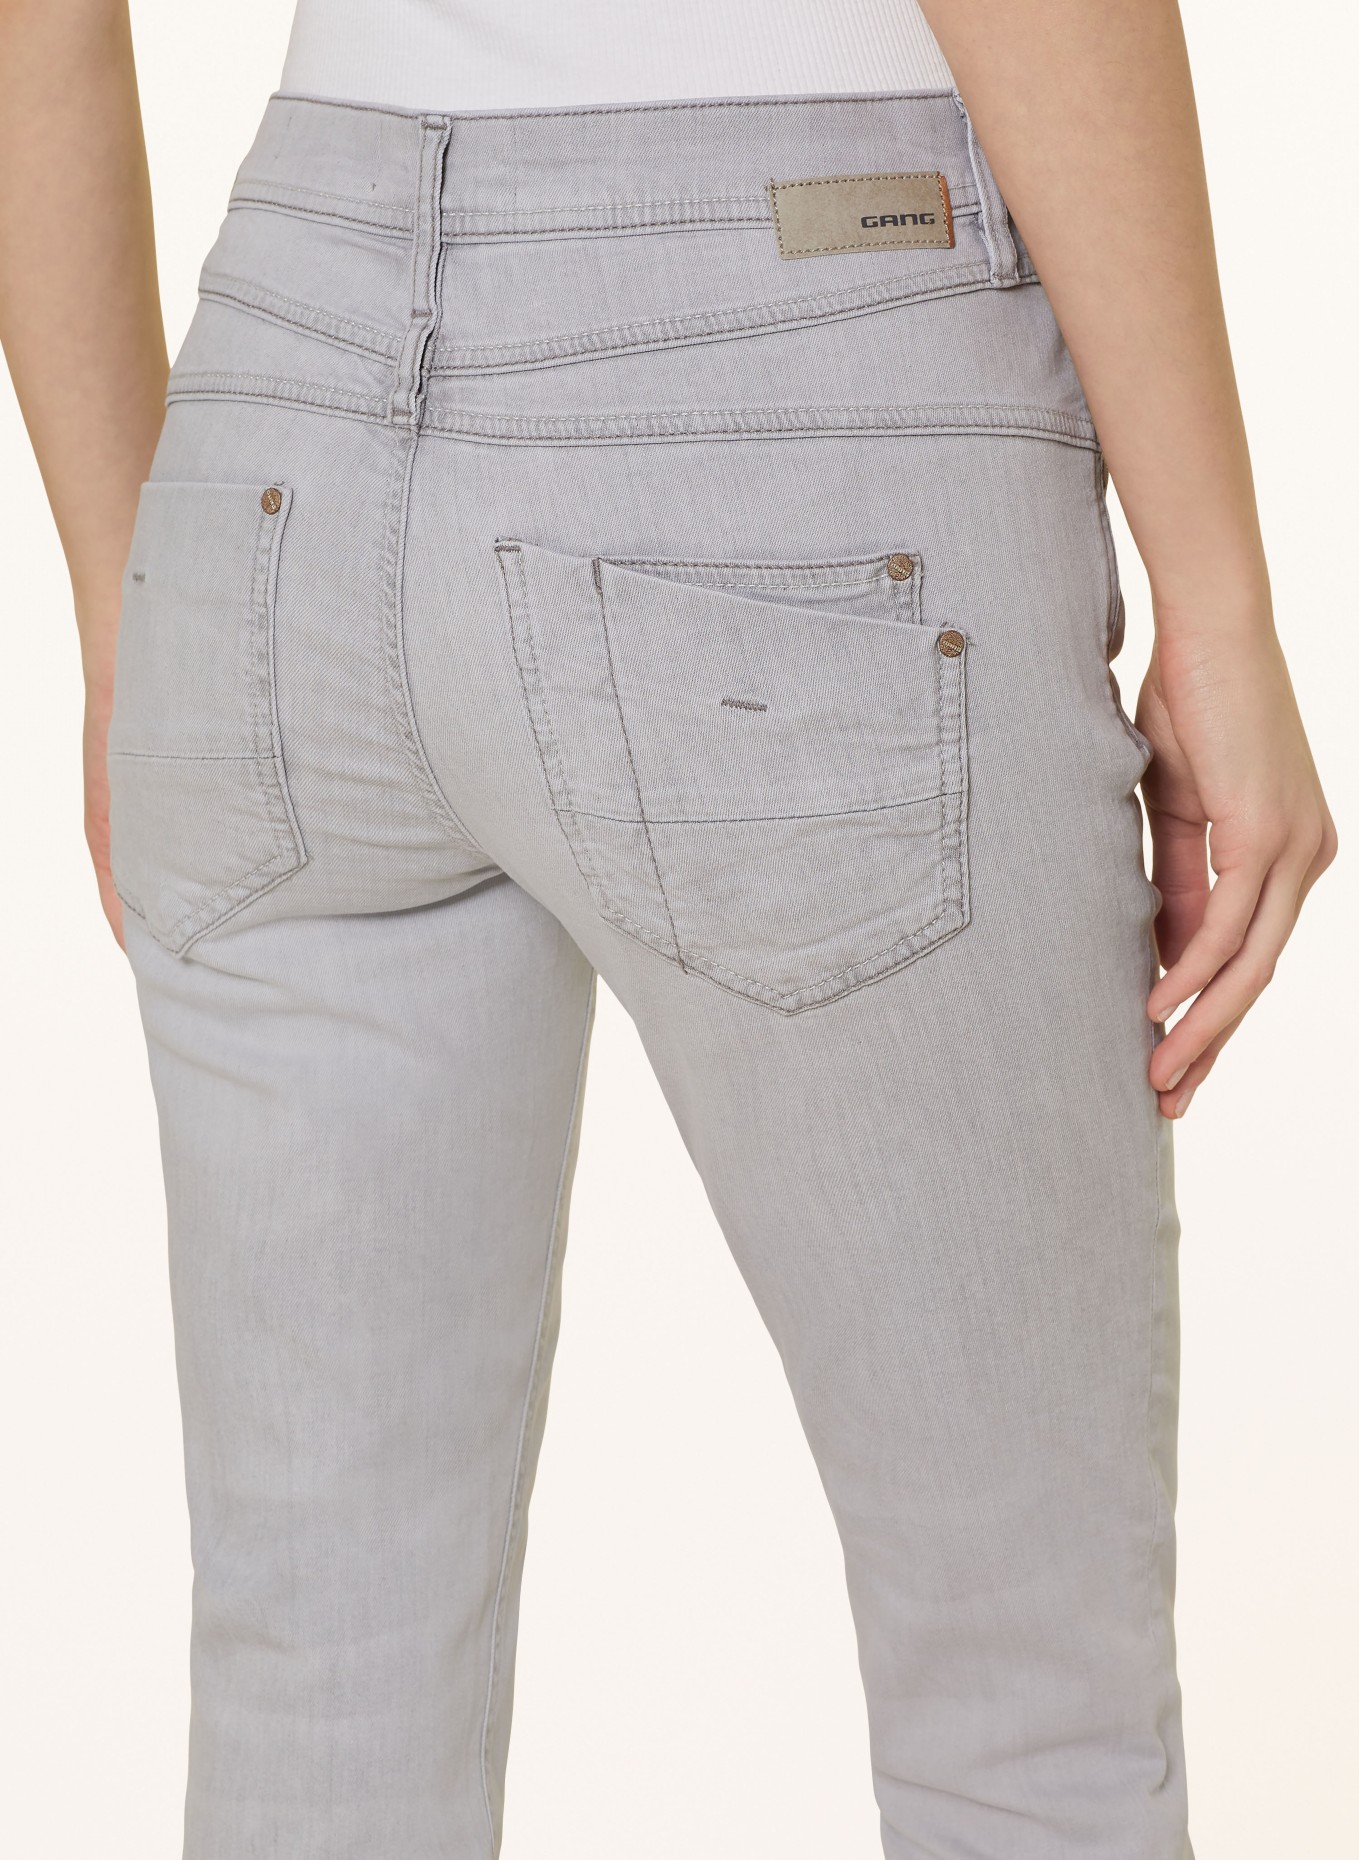 GANG 7/8 jeans AMELIE CROPPED, Color: 7108 clowdy gray (Image 5)